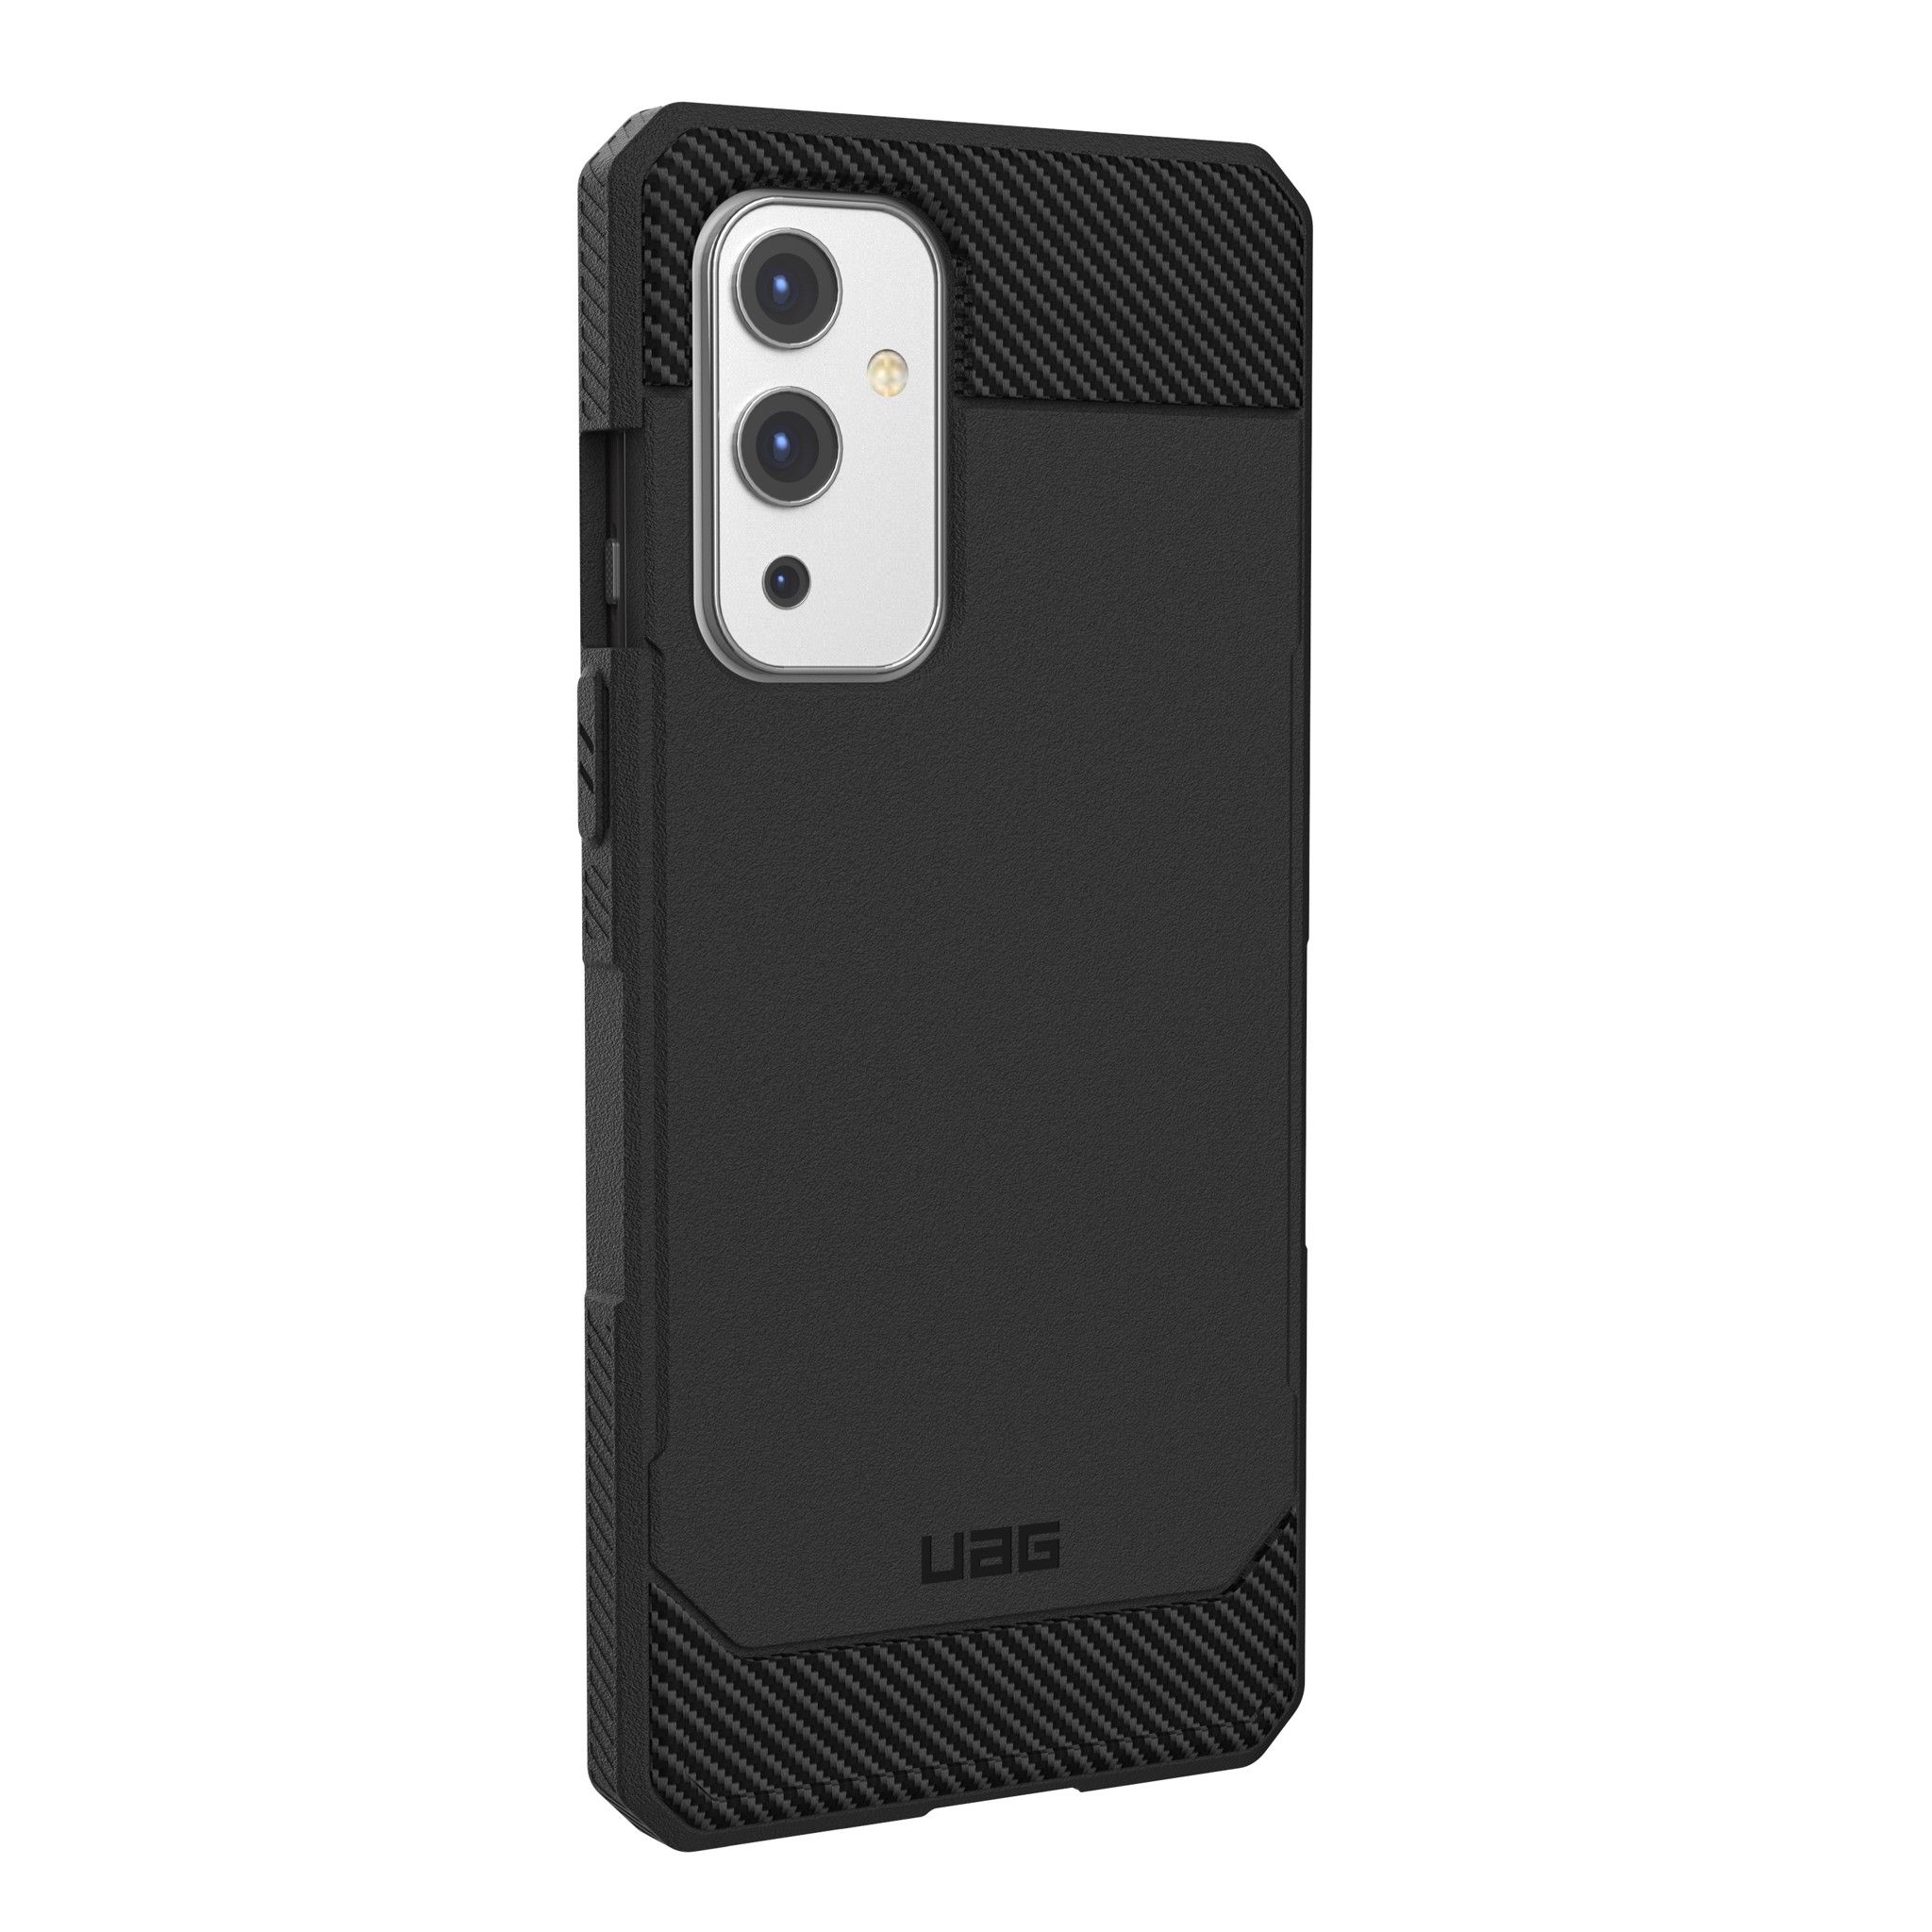  Ốp lưng Scout+ cho OnePlus 9 [6.55-inch] 